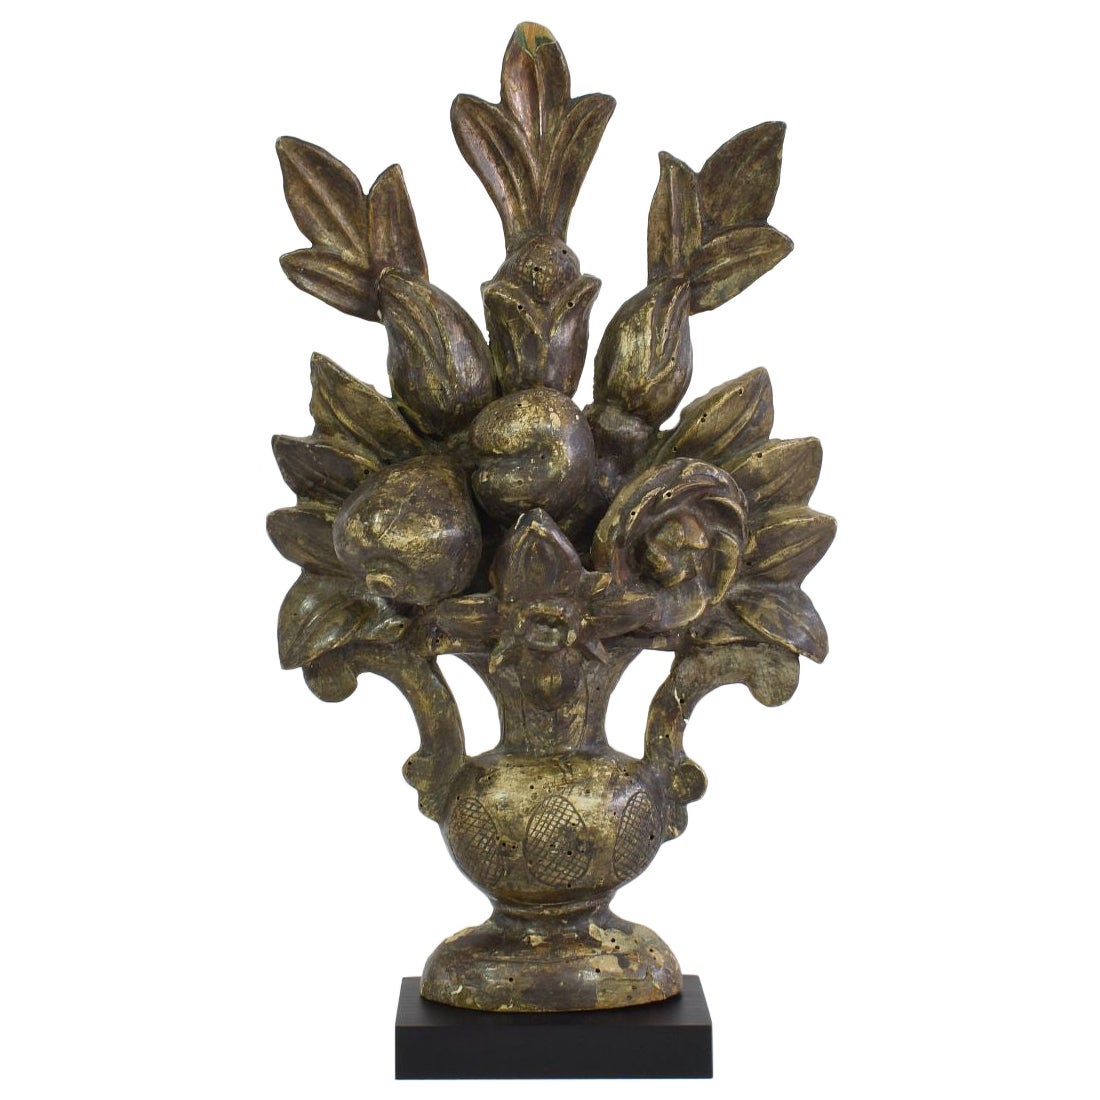 Italian 18th Century Baroque Carved Wooden Vase Ornament